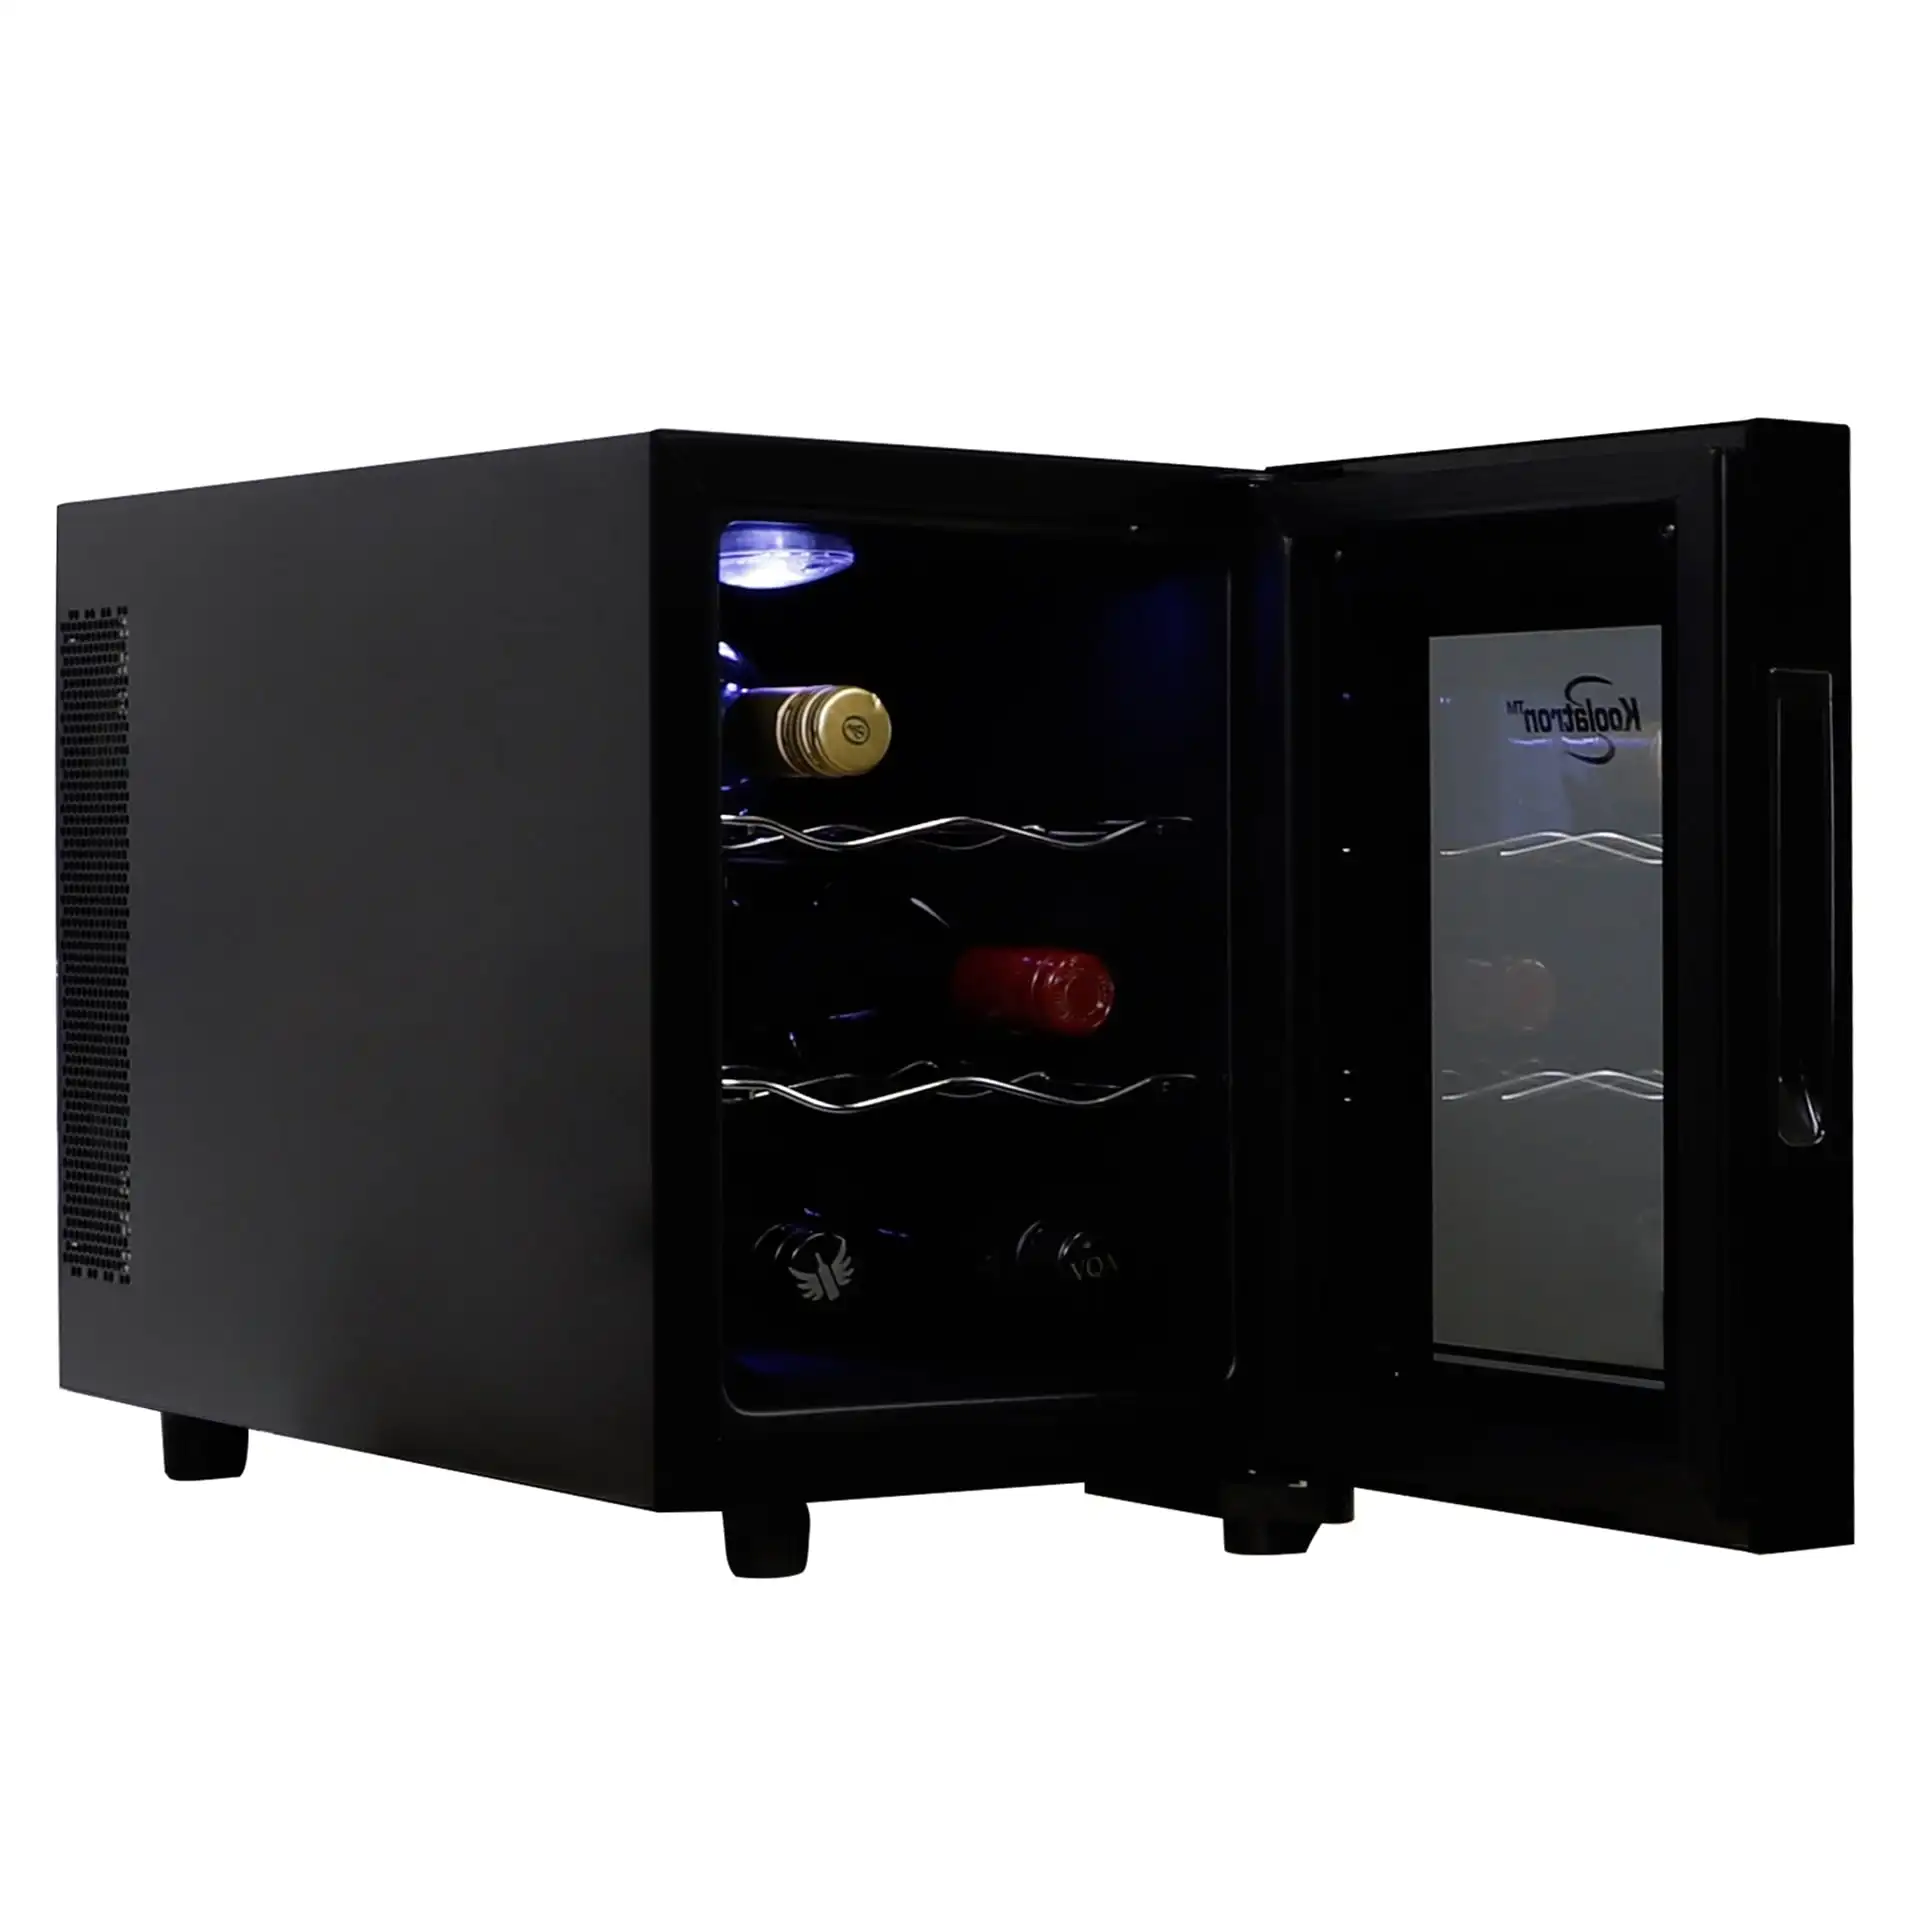 

Urban Series Deluxe 6 Bottle Wine Cooler Thermoelectric Refrigerator with Digital Temperature Controls